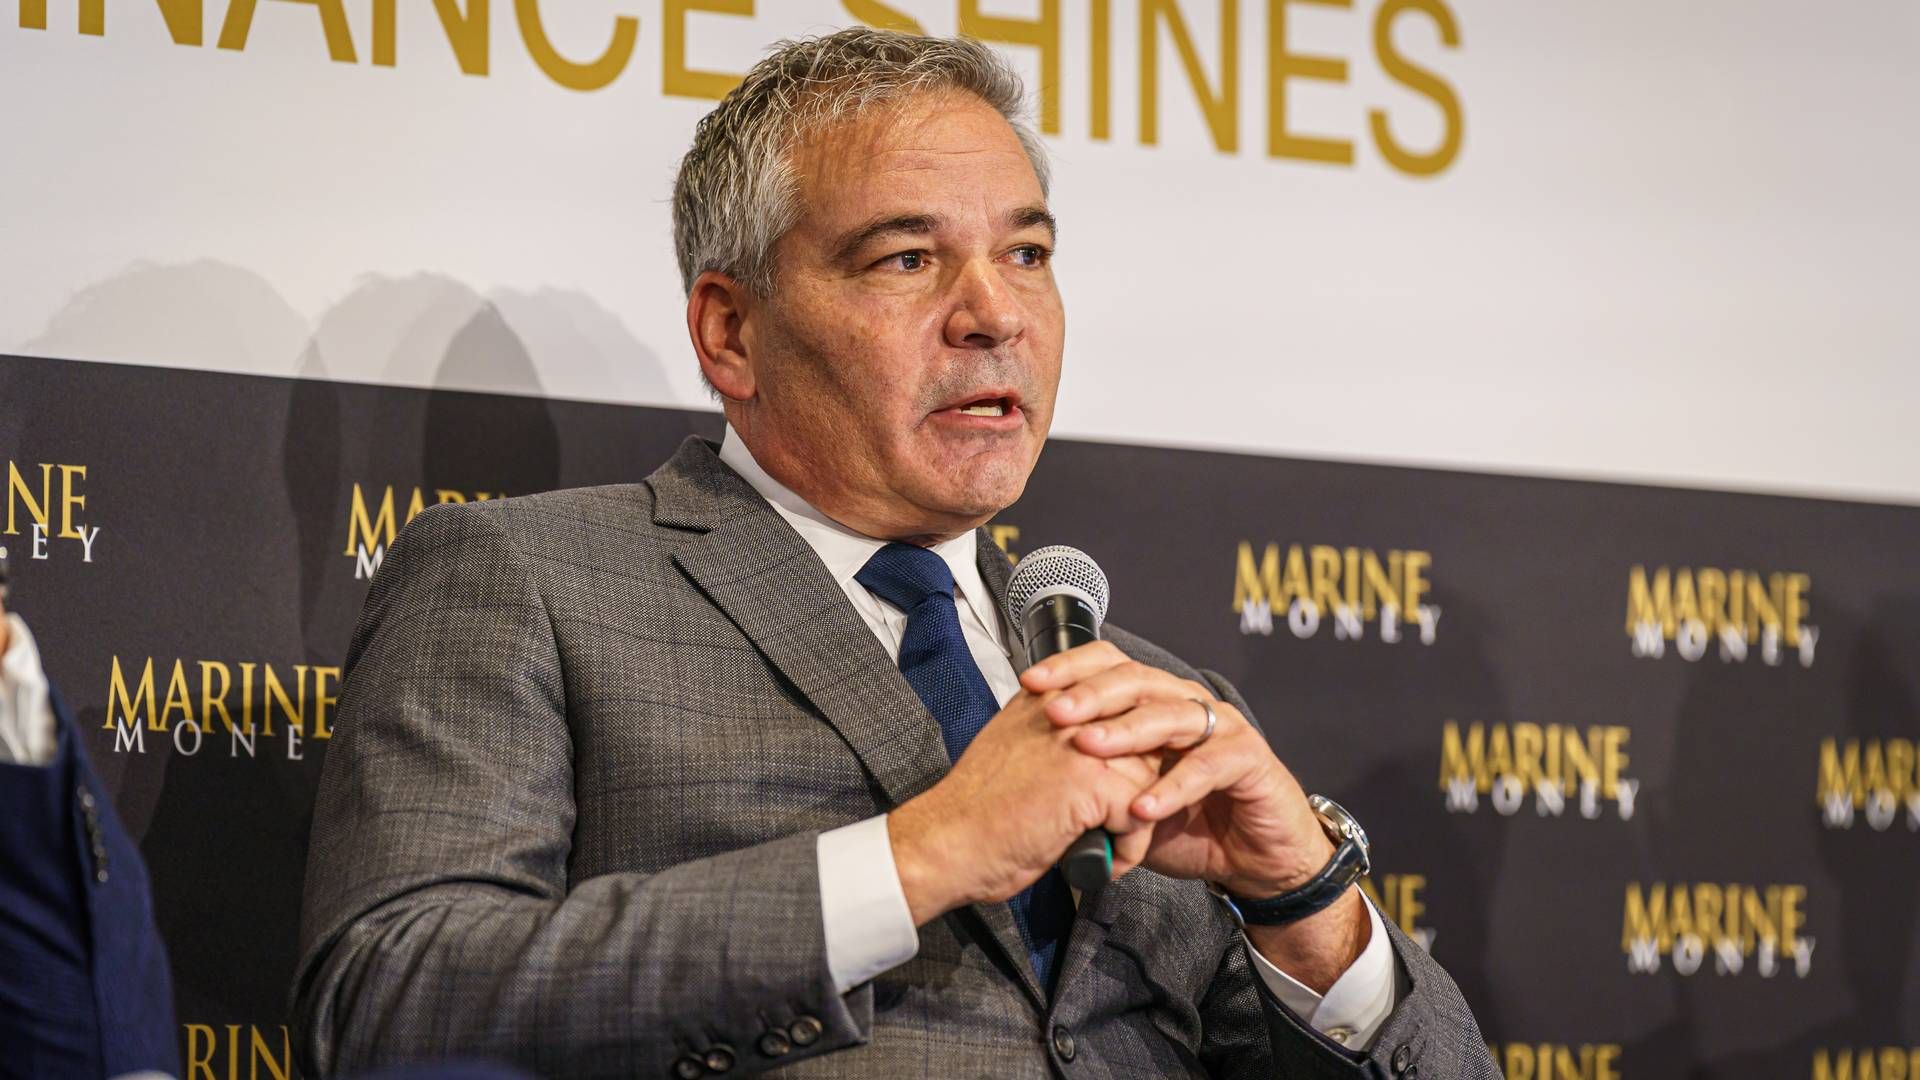 Eagle Bulk must be compensated by customers when ships from next year will be far below the EU ETS, says CEO Gary Vogel. | Photo: David Butler / Marine Money